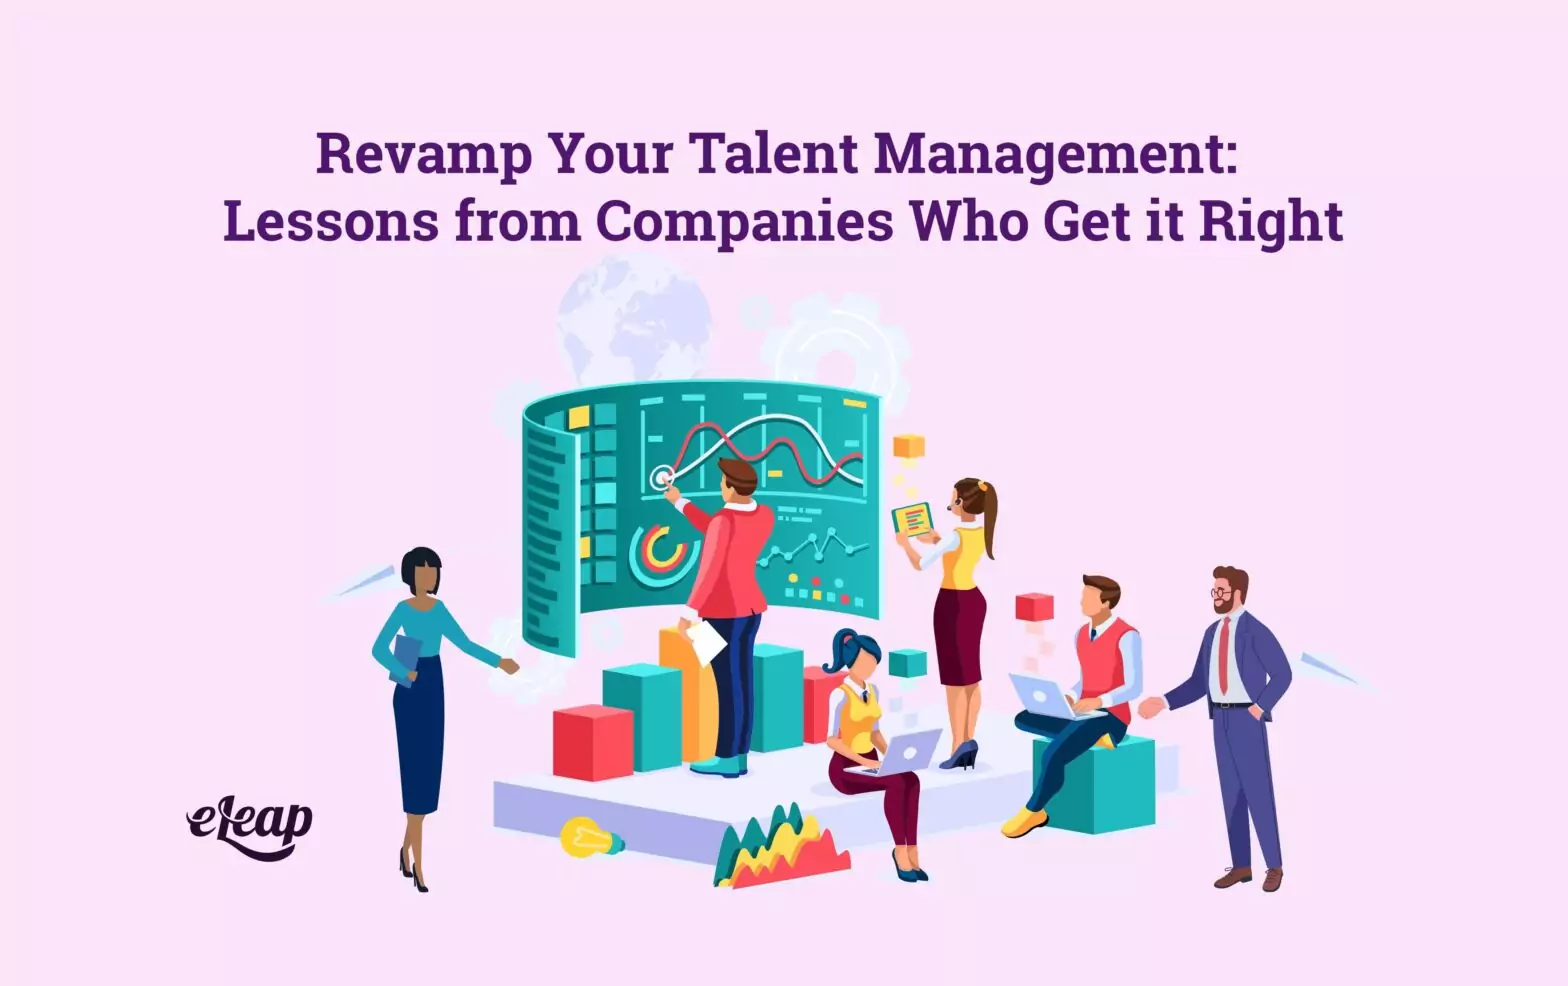 Revamp Your Talent Management: Lessons from Companies Who Get it Right